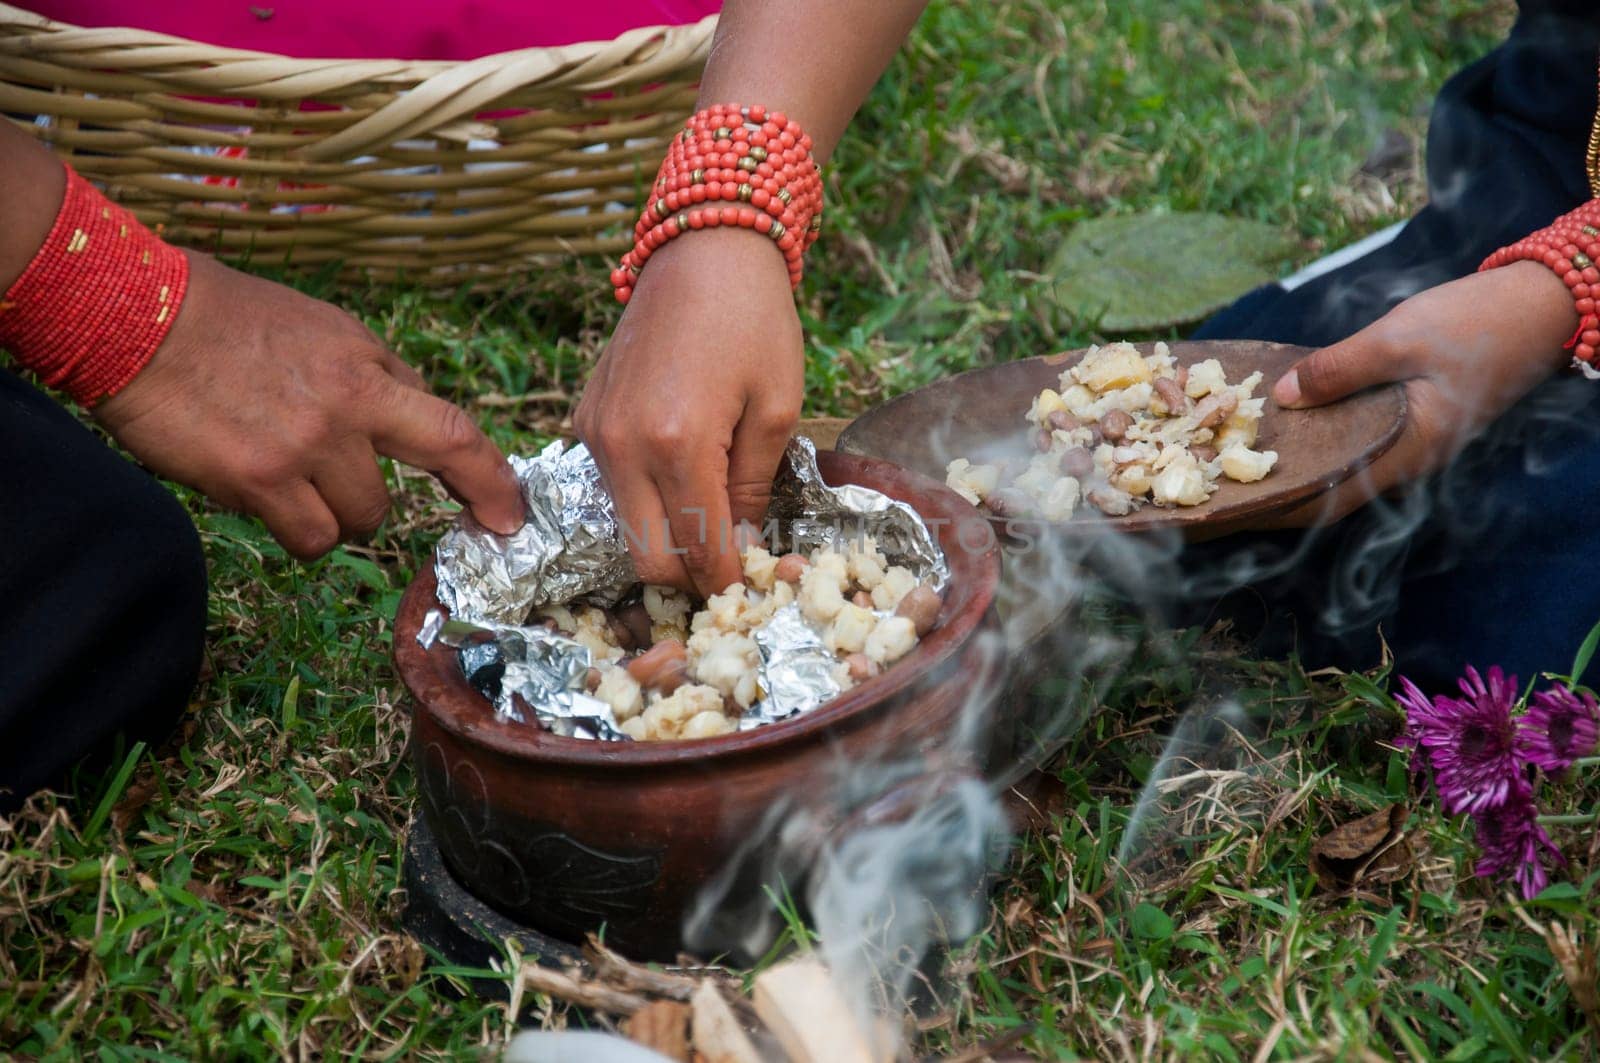 Ancestral Flavors: Indigenous Handcrafting a Meal in the Amazon Jungle by Raulmartin